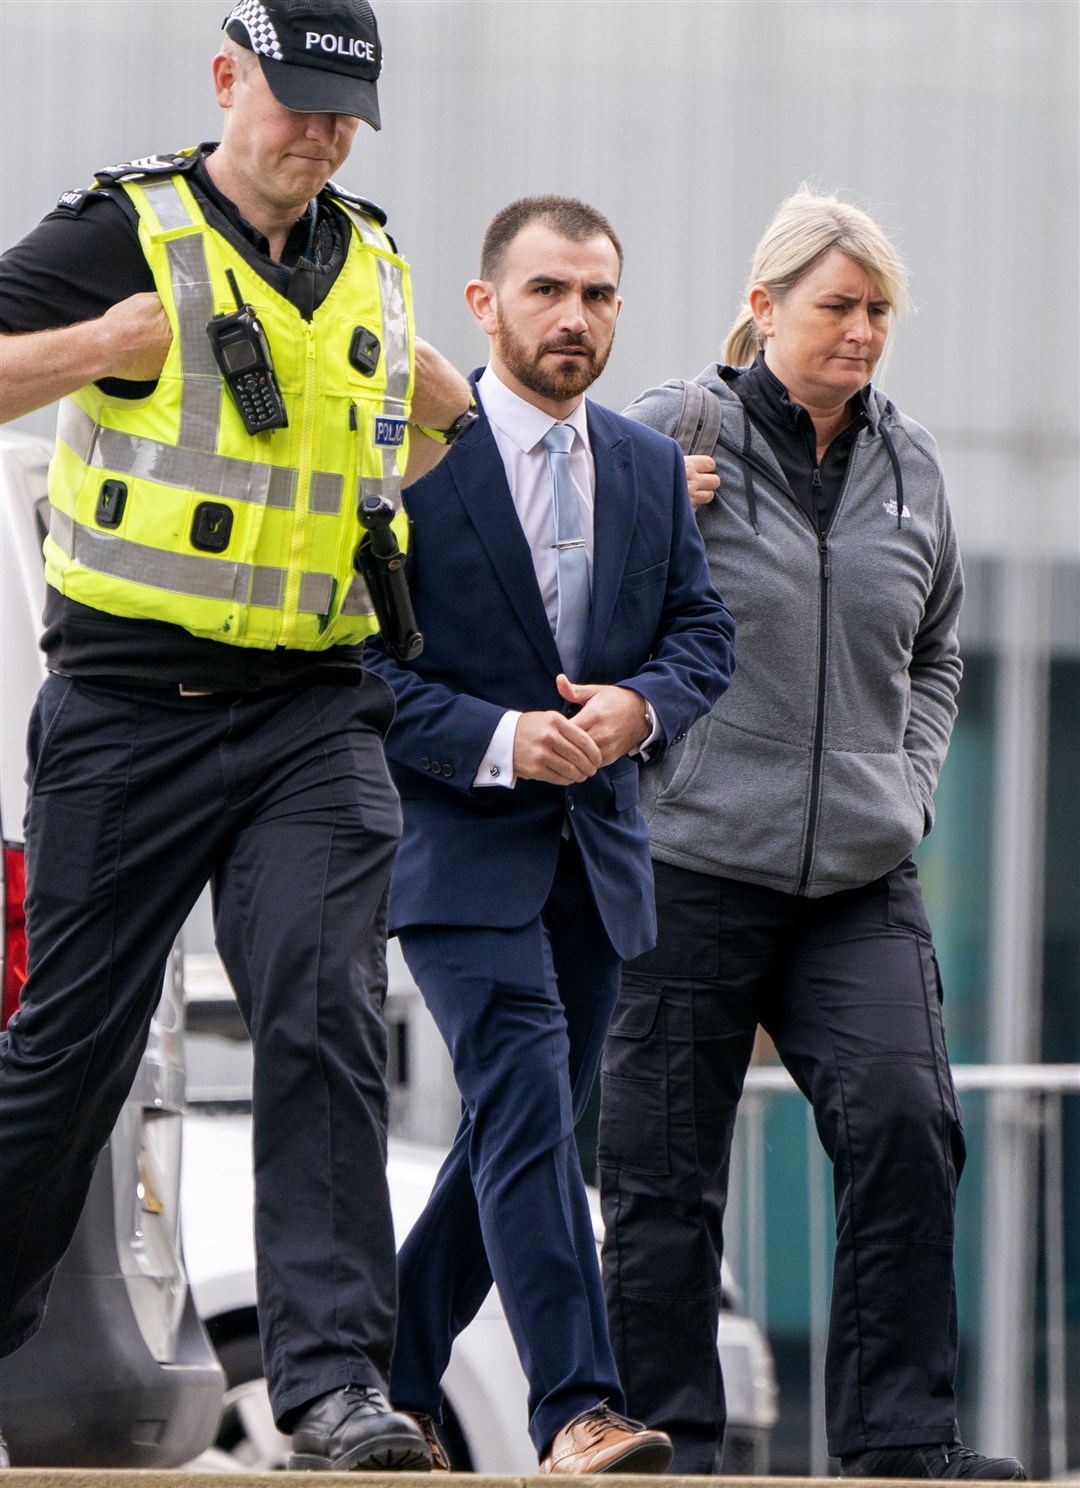 Pc James McDonough (centre) arrives at Capital House in Edinburgh for the public inquiry (Jane Barlow/PA)